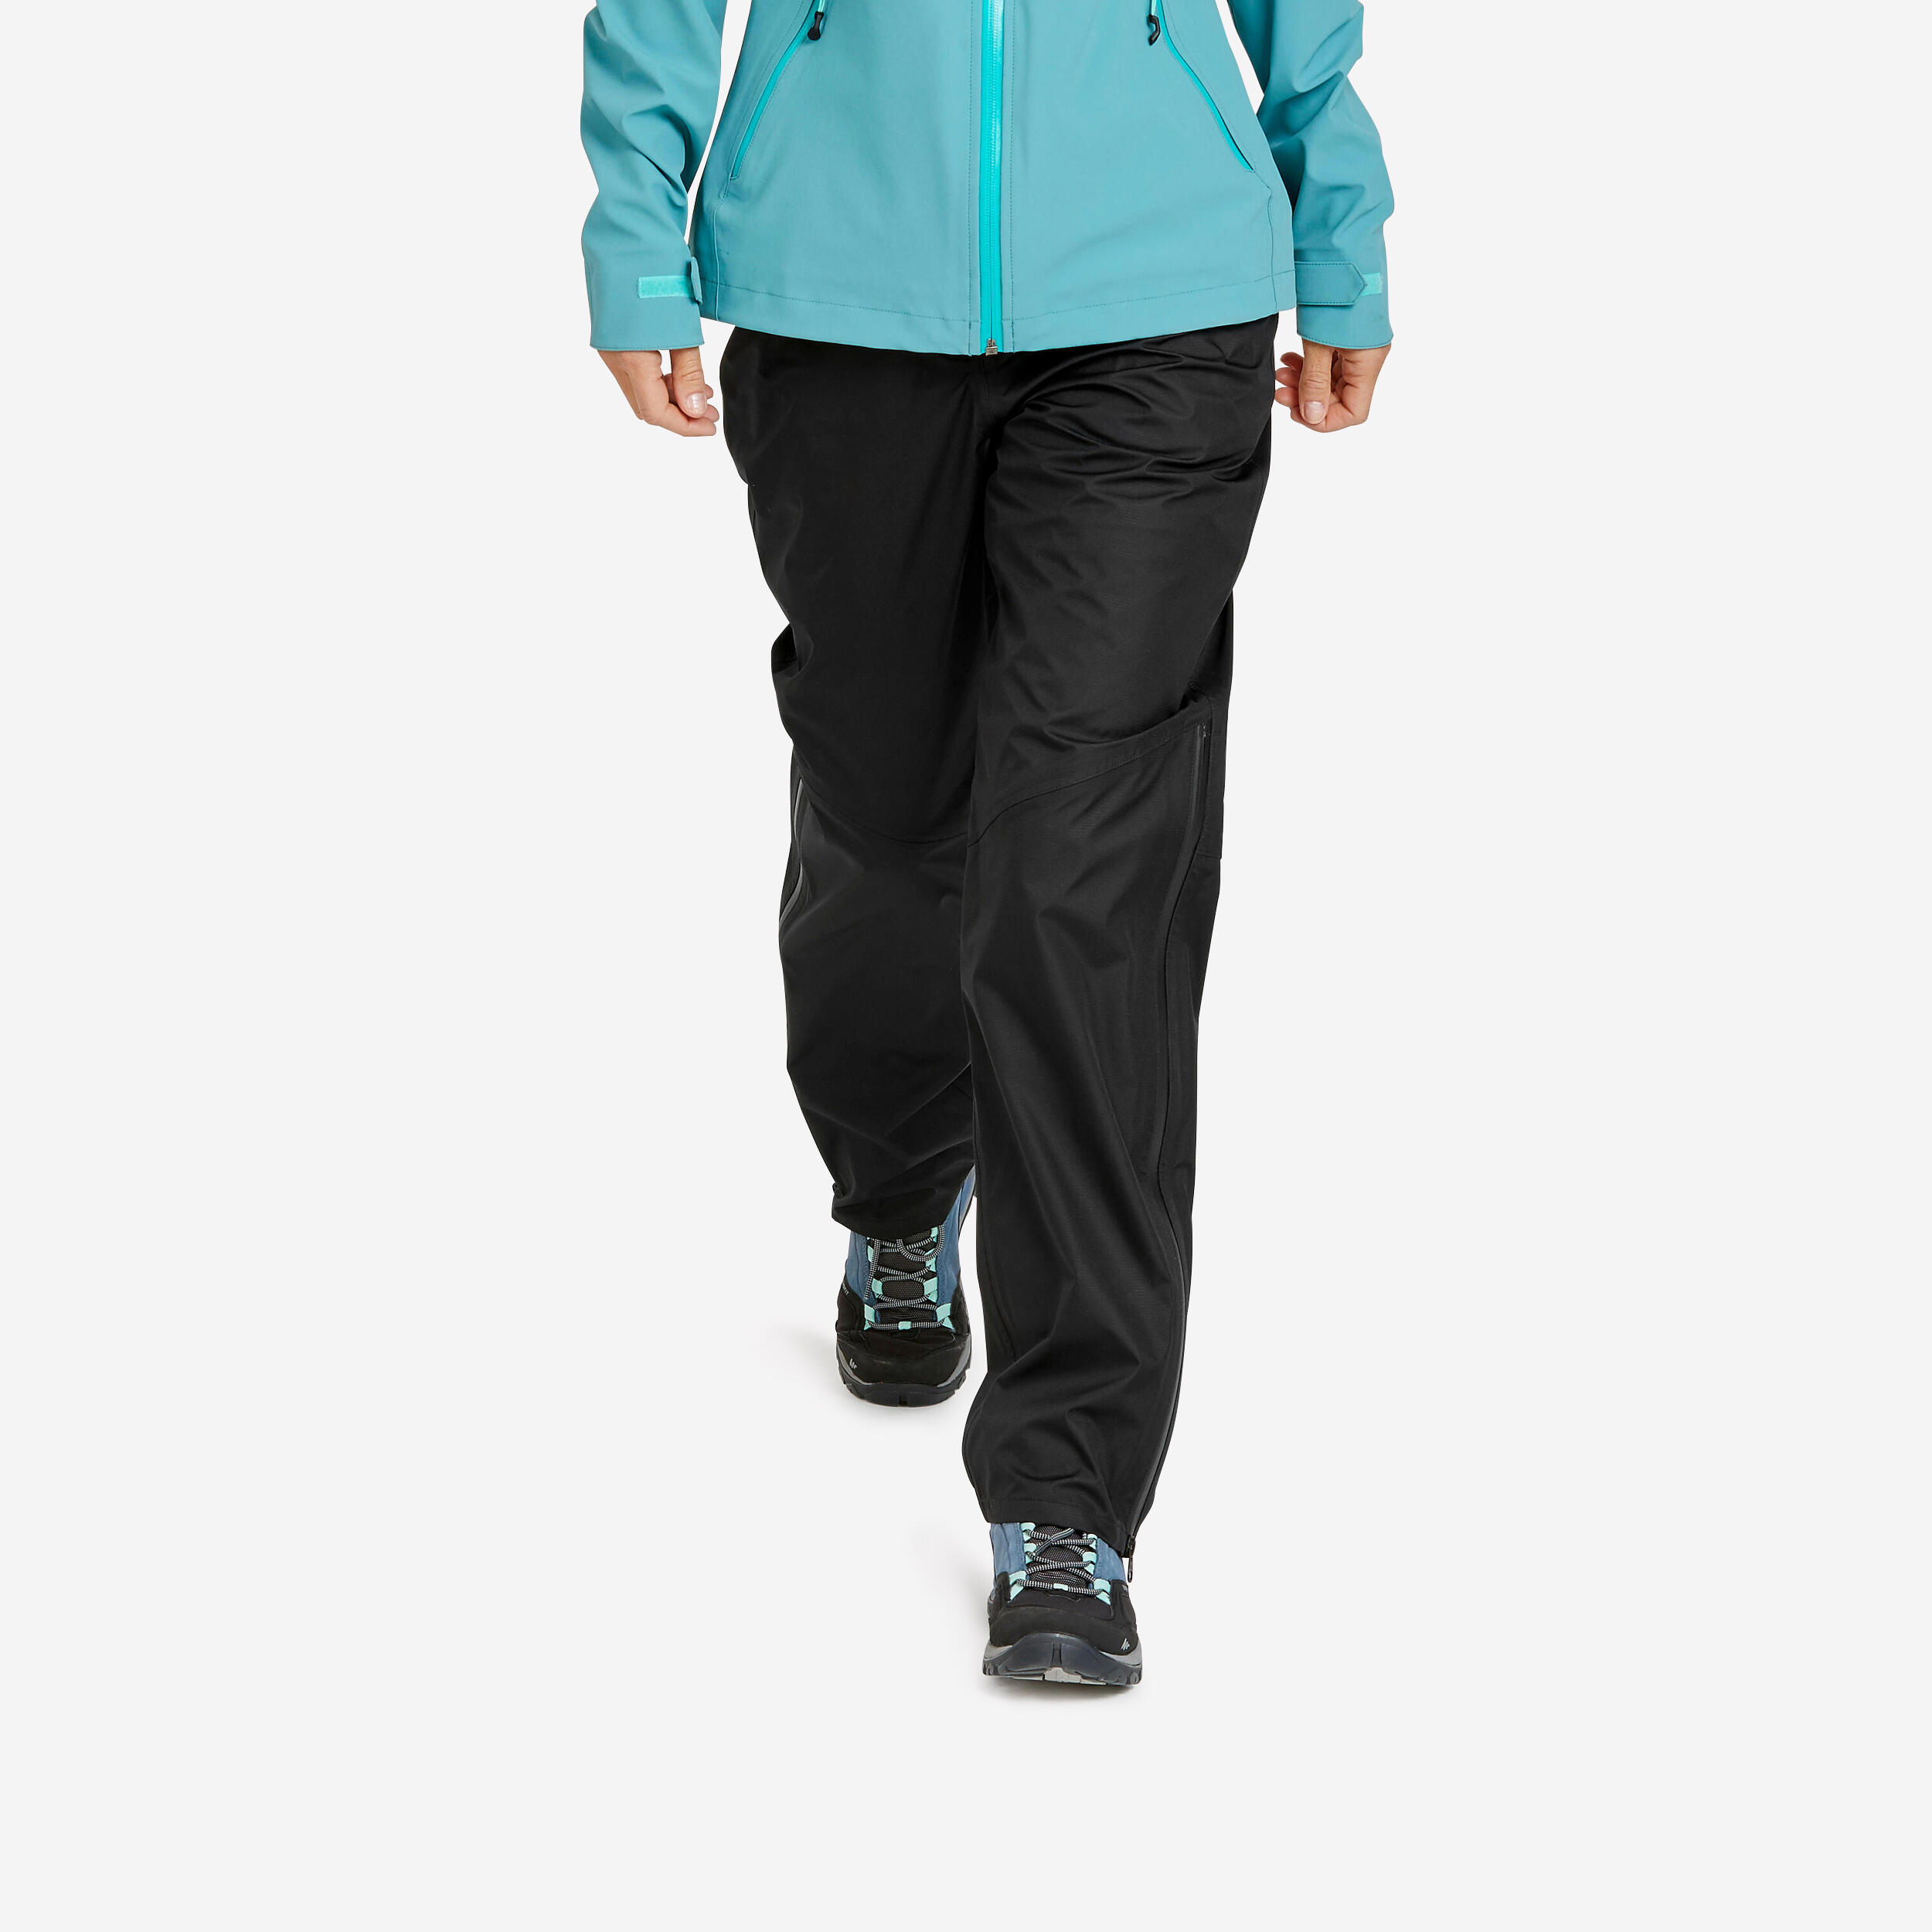 Womens Waterproof Trousers and Over Trousers for Walking